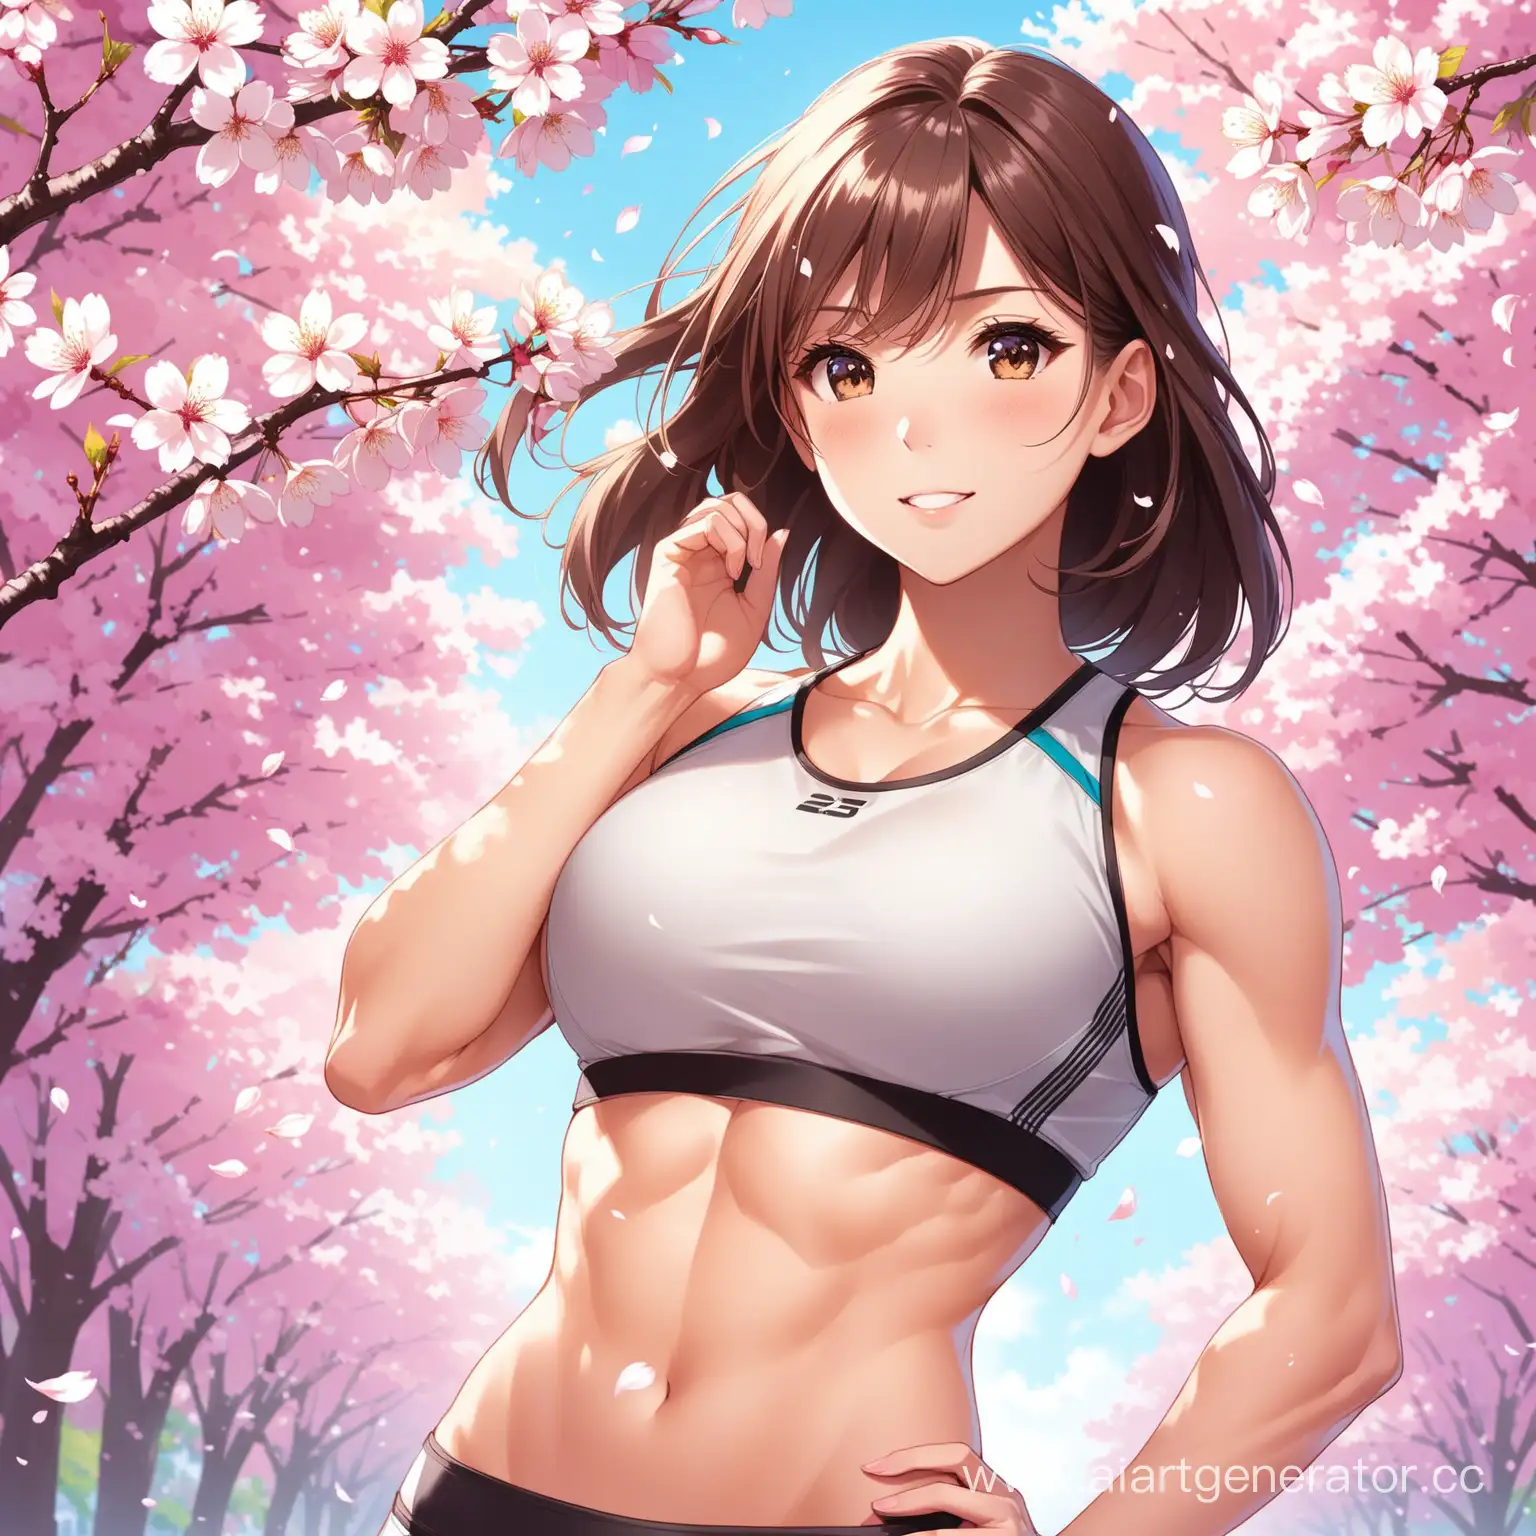 Fit-Female-Athlete-in-Full-Bloom-with-Cherry-Blossoms